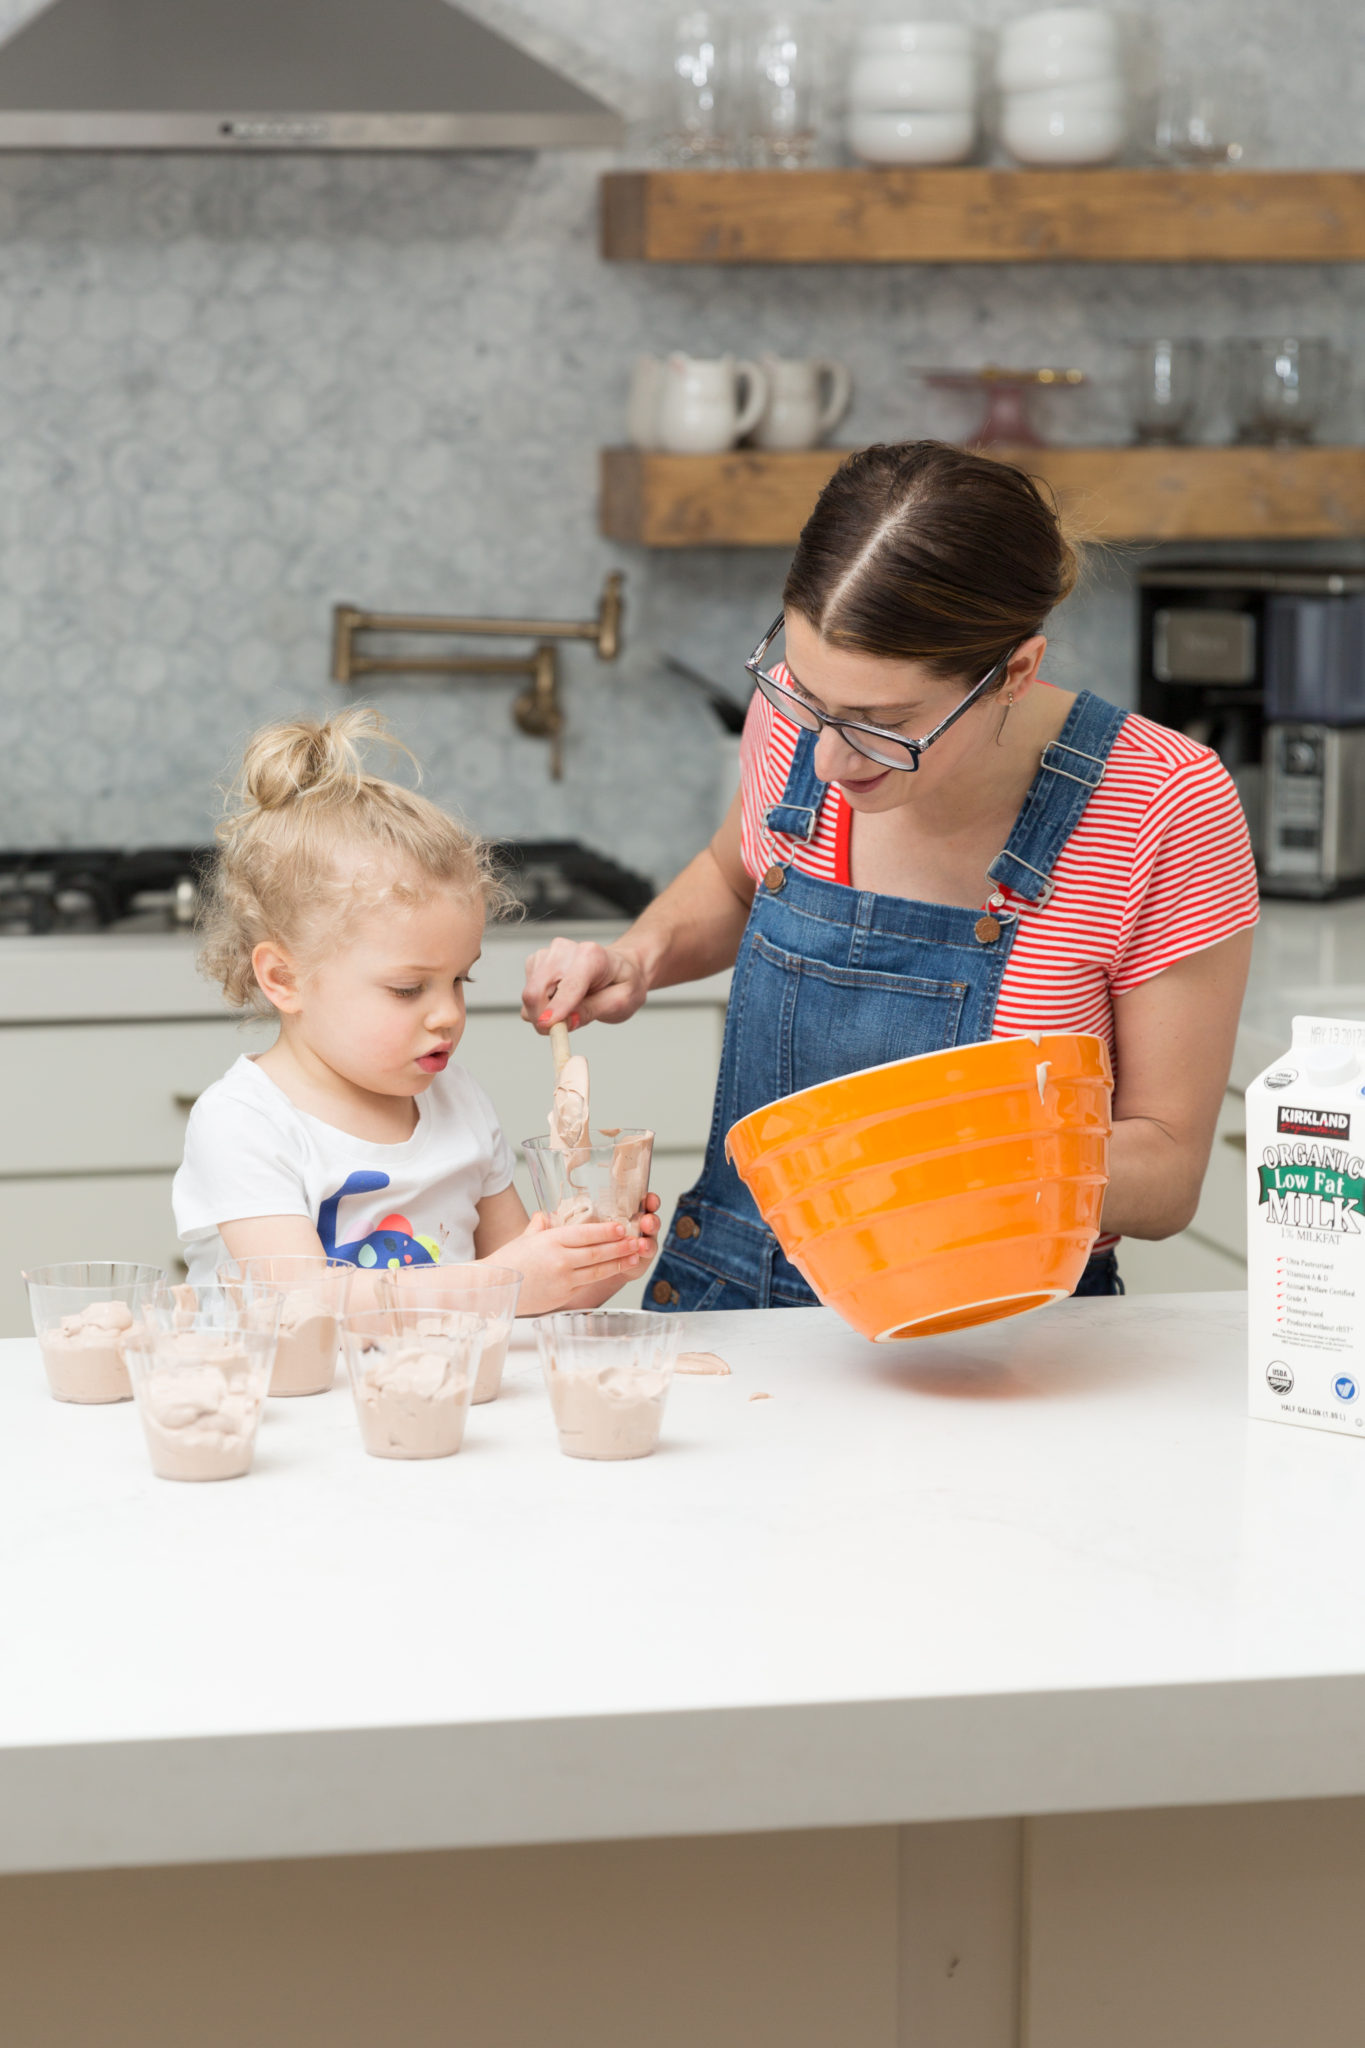 How to make dirt cups for earth day | easy desserts you can make with toddlers | how to get your toddler to help in the kitchen on allweareblog.com